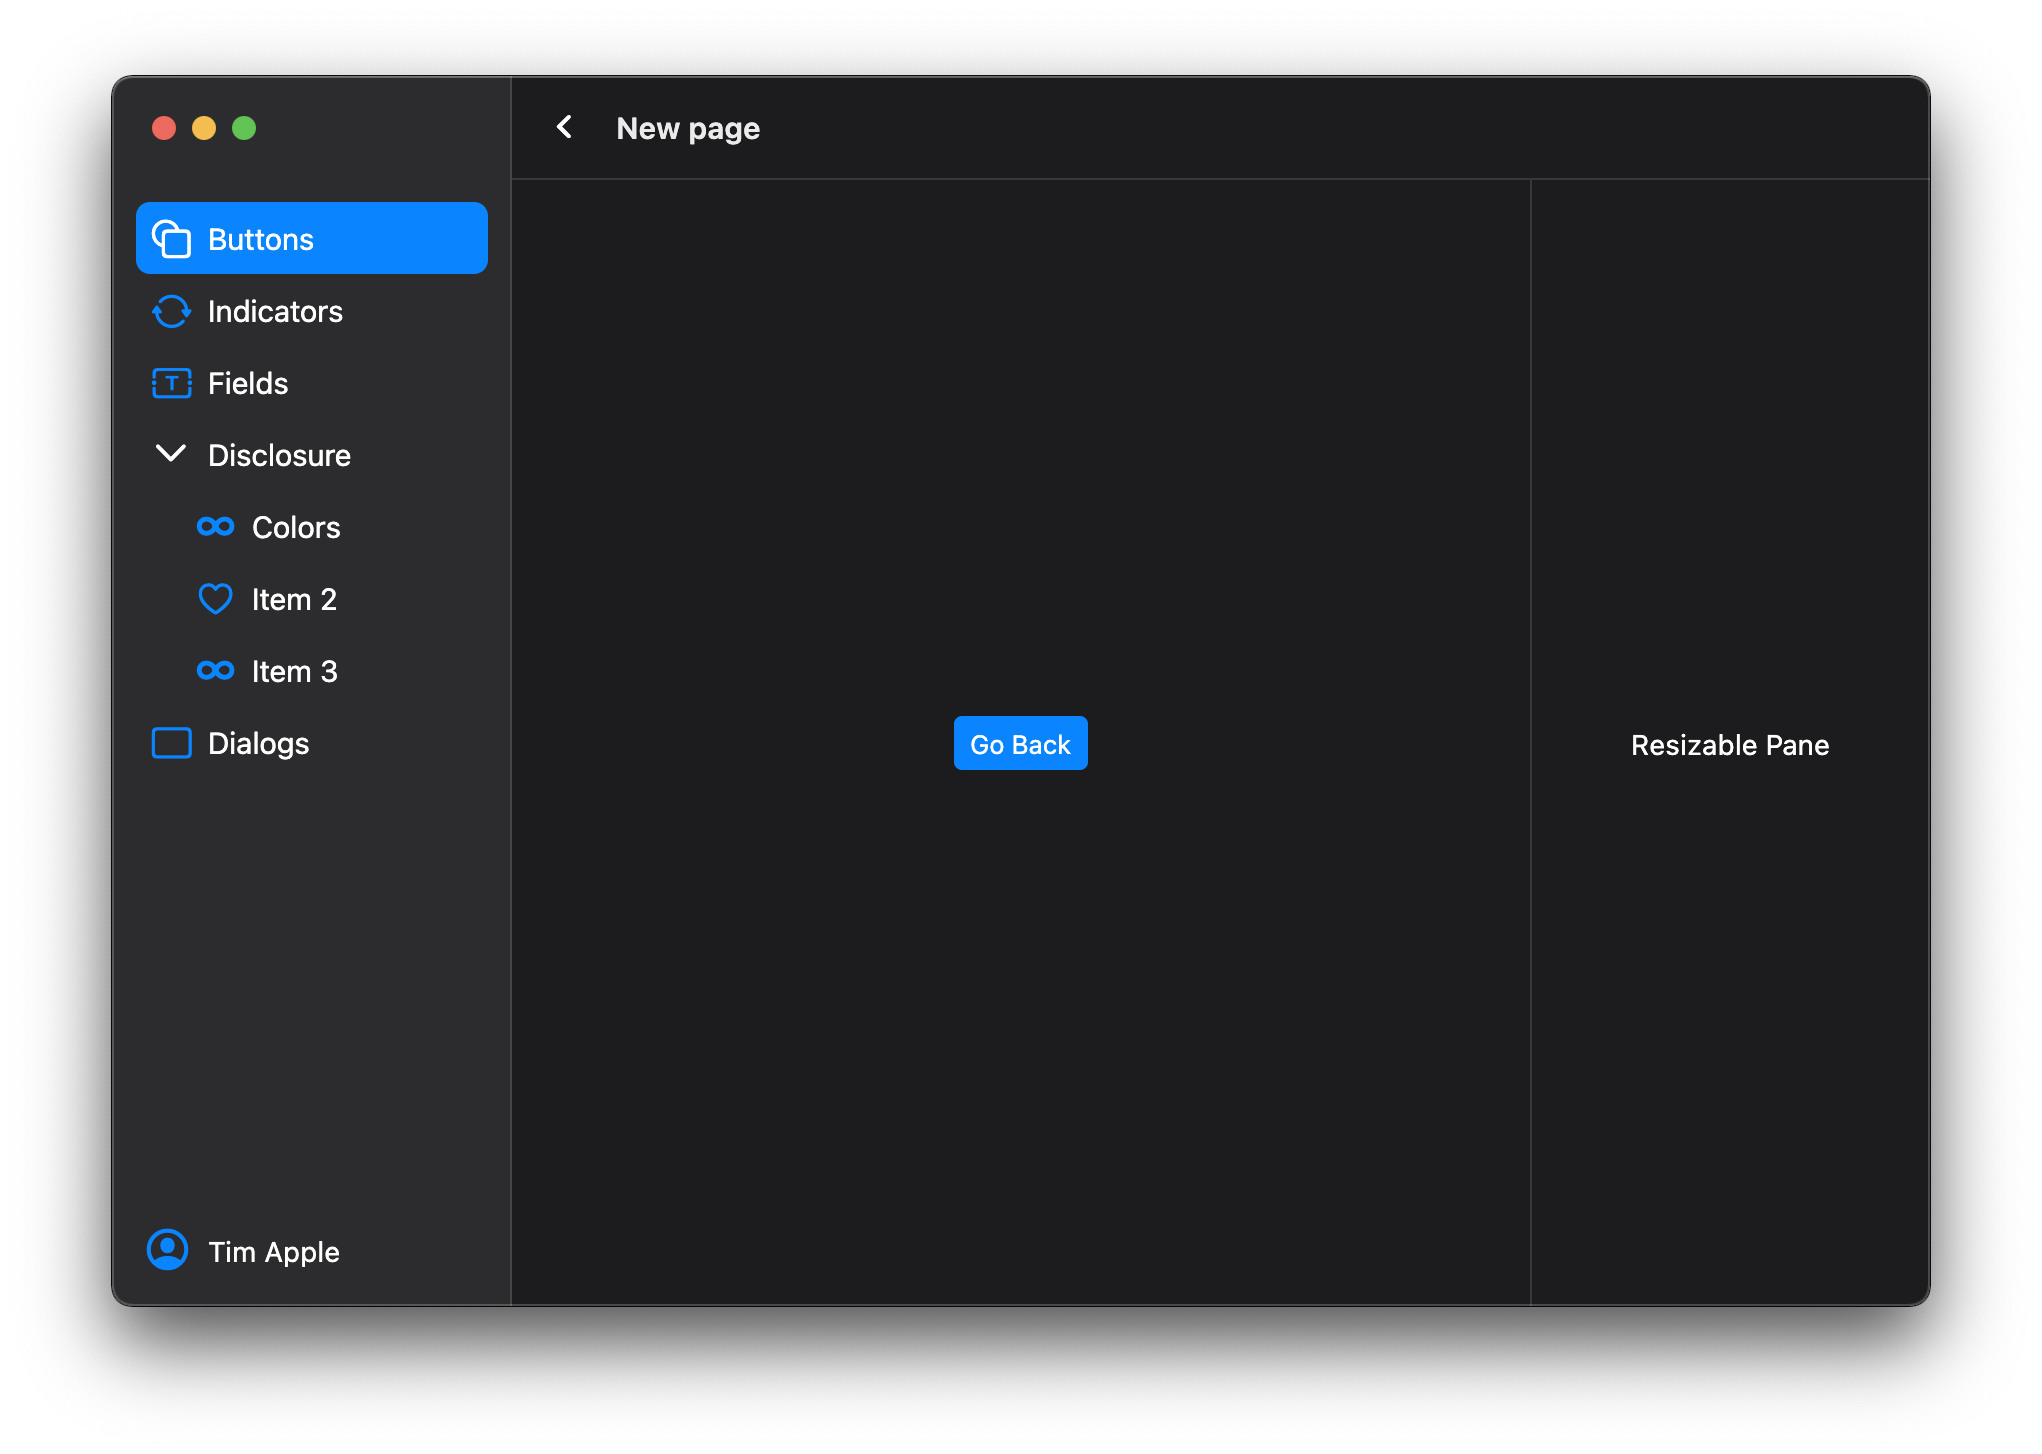 Flutter widgets and themes implementing the current macOS design language